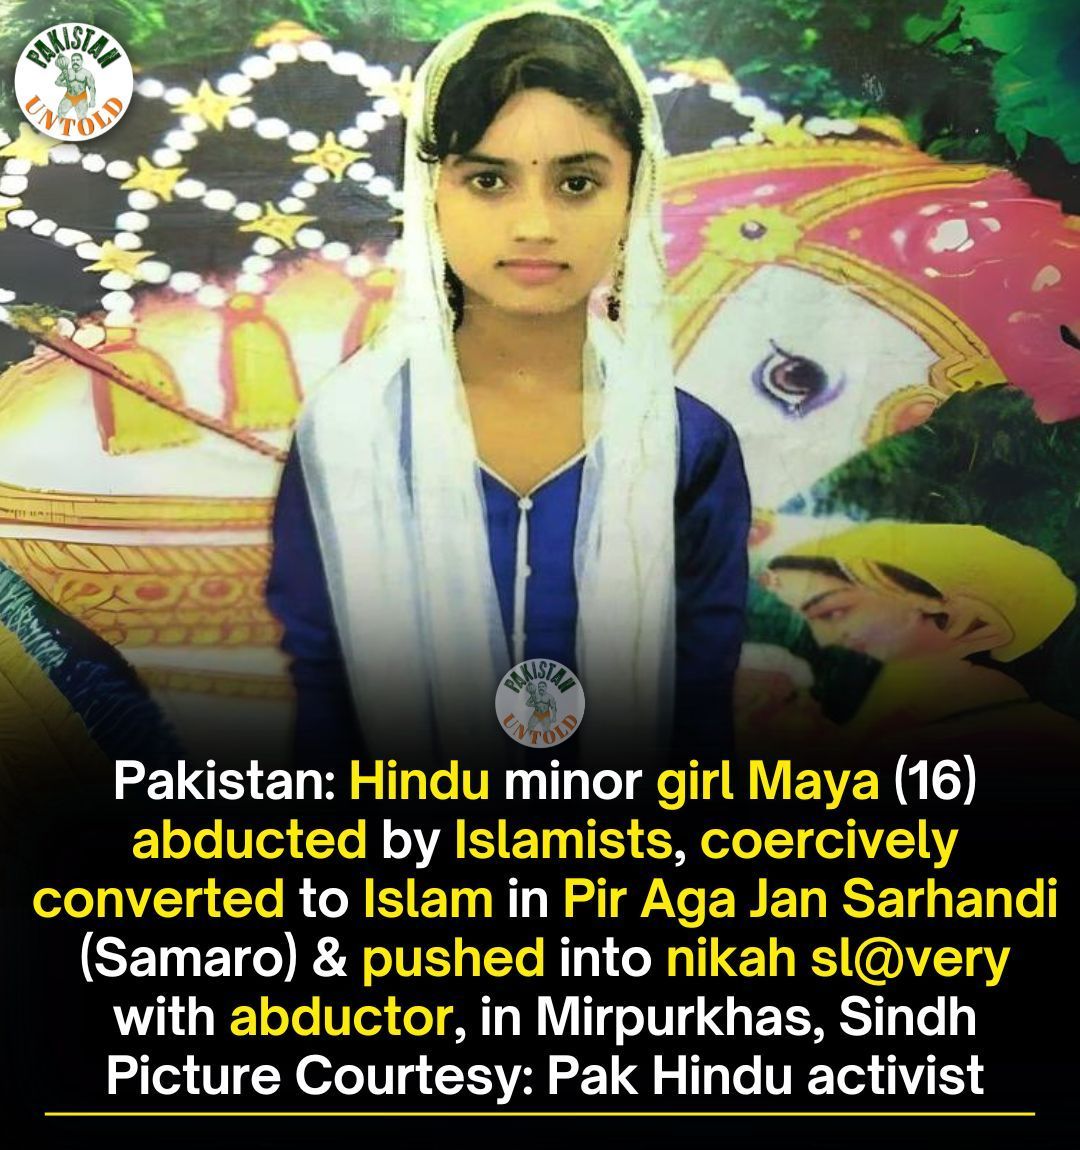 Another Pakistani Hindu minor girl abducted by Islamists for possible forced conversion to Islam and Nikah sl@very. Doesn't matter whether it's Pakistan or Bangladesh, 'womb capture' happening with a method & mission.